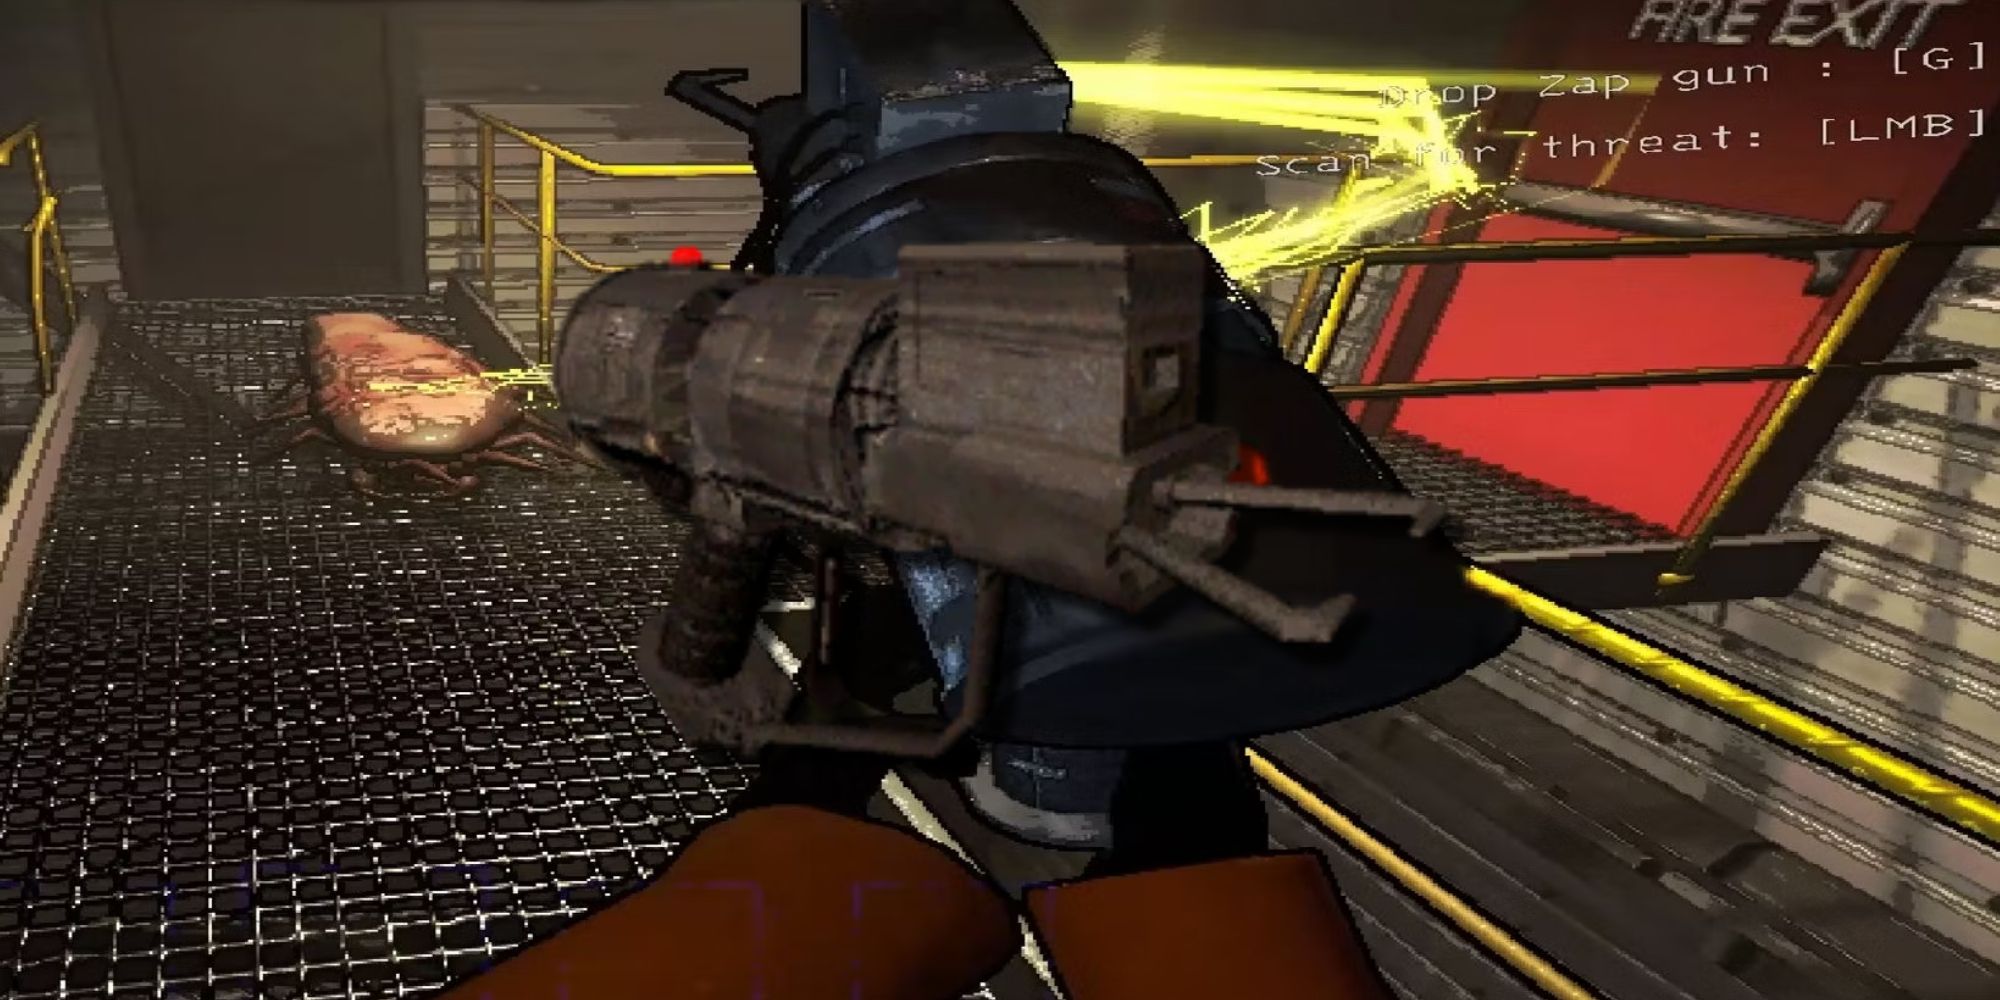 A player is using a zap gun as a weapon against a snare flea